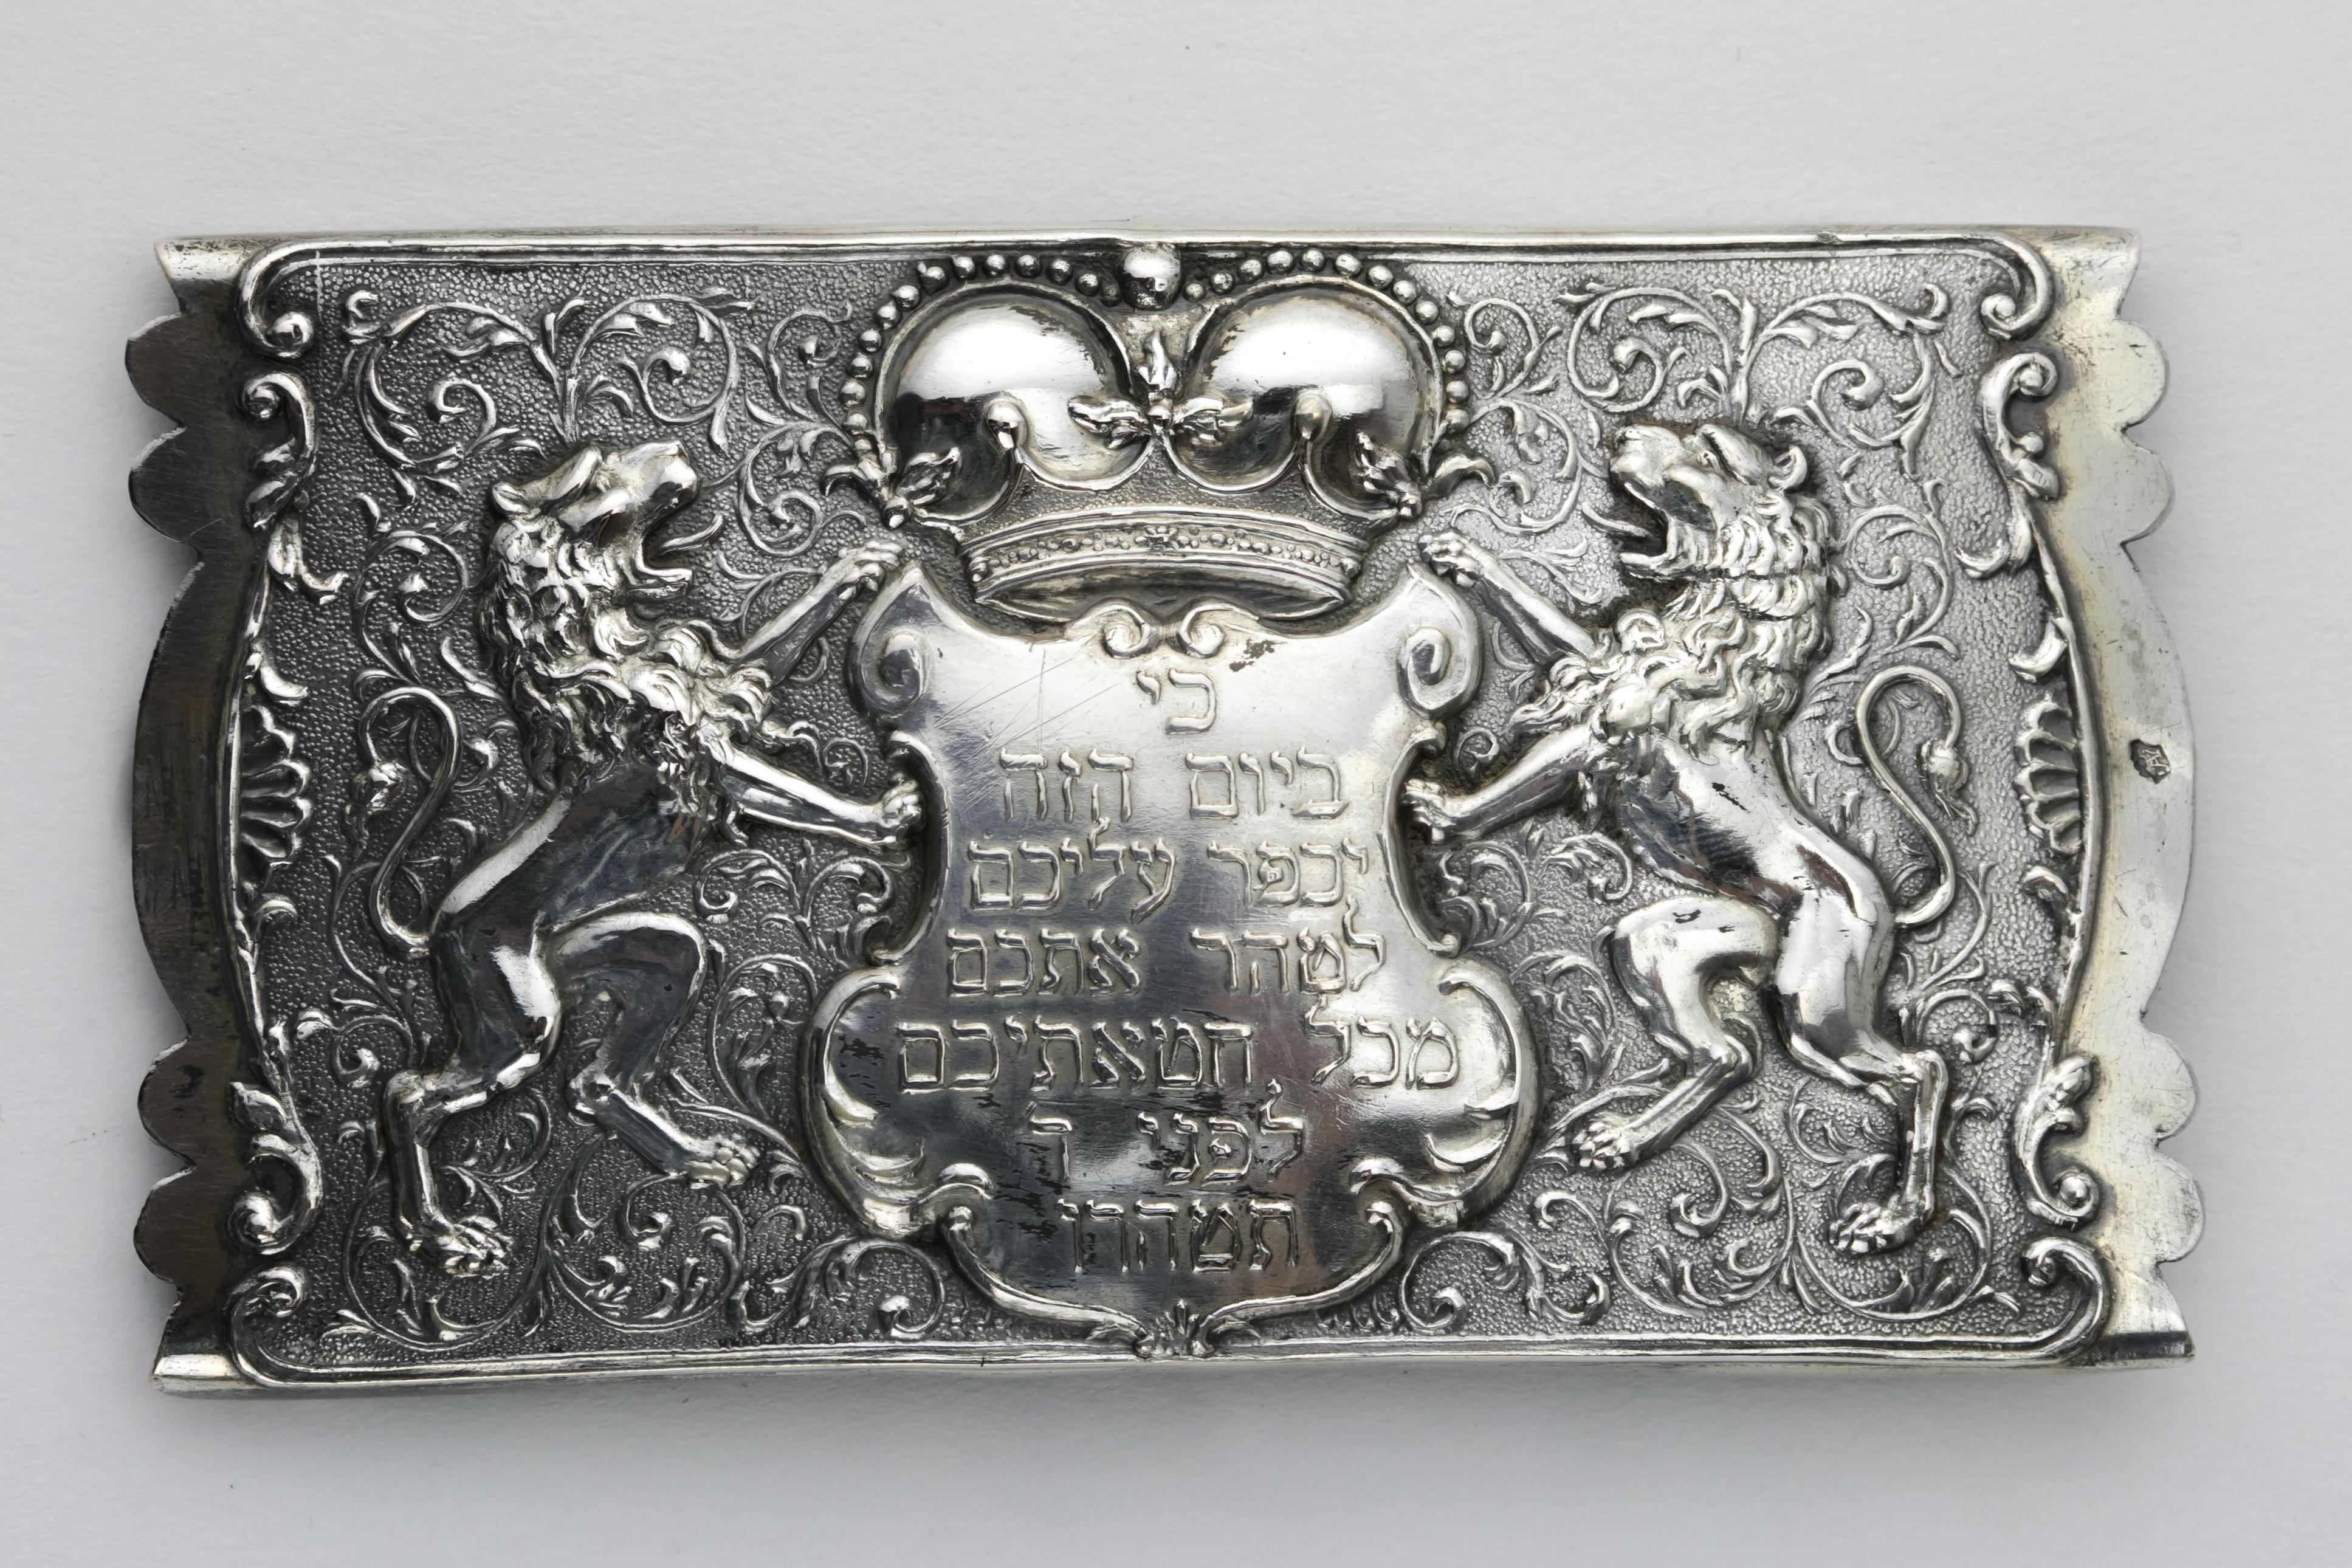 Handmade silver Yom Kippur belt buckle, Austro-Hungarian Empire, circa 1870.
Repoussé with Lions of Judah flanking a crowned cartouche whose interior reads in Hebrew “For on this day He will make atonement for you, to purify you from all your sins,